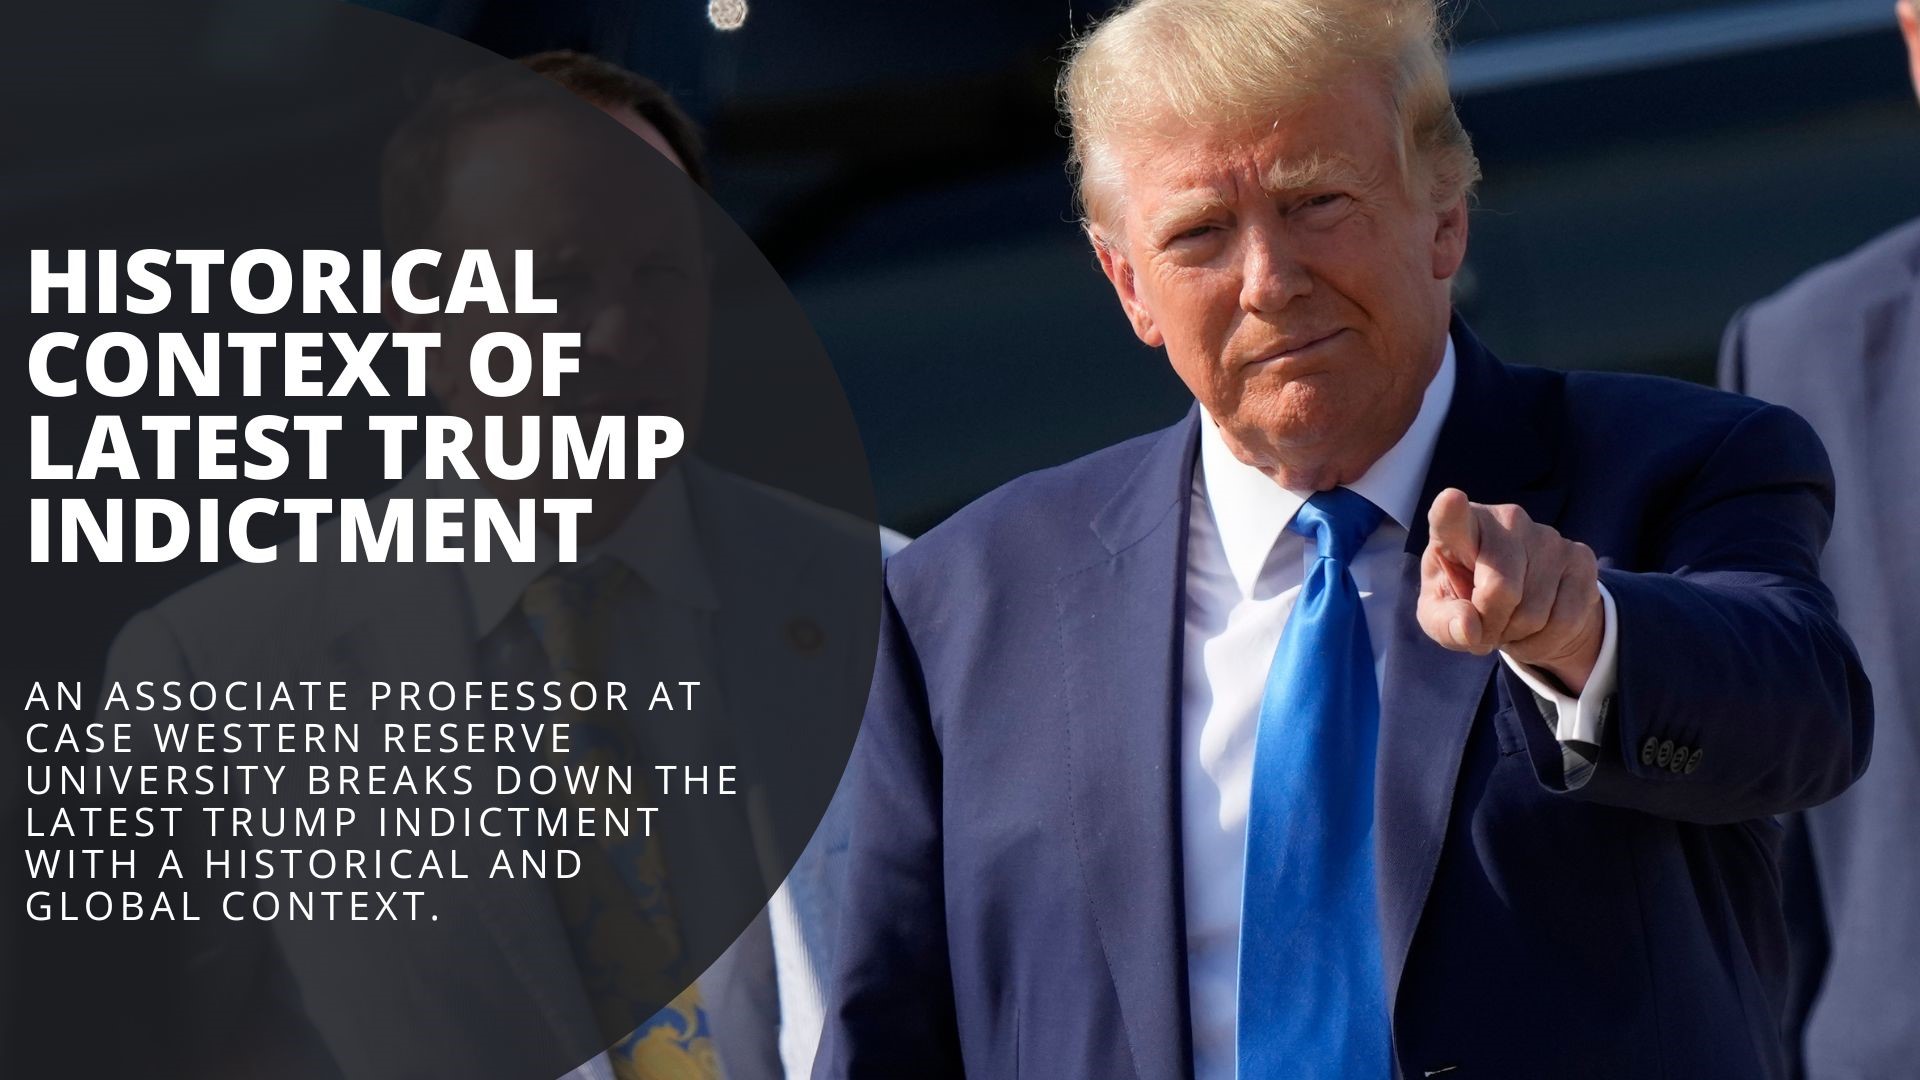 An associate professor at Case Western Reserve University breaks down the latest indictment against Trump with a historical and global context.